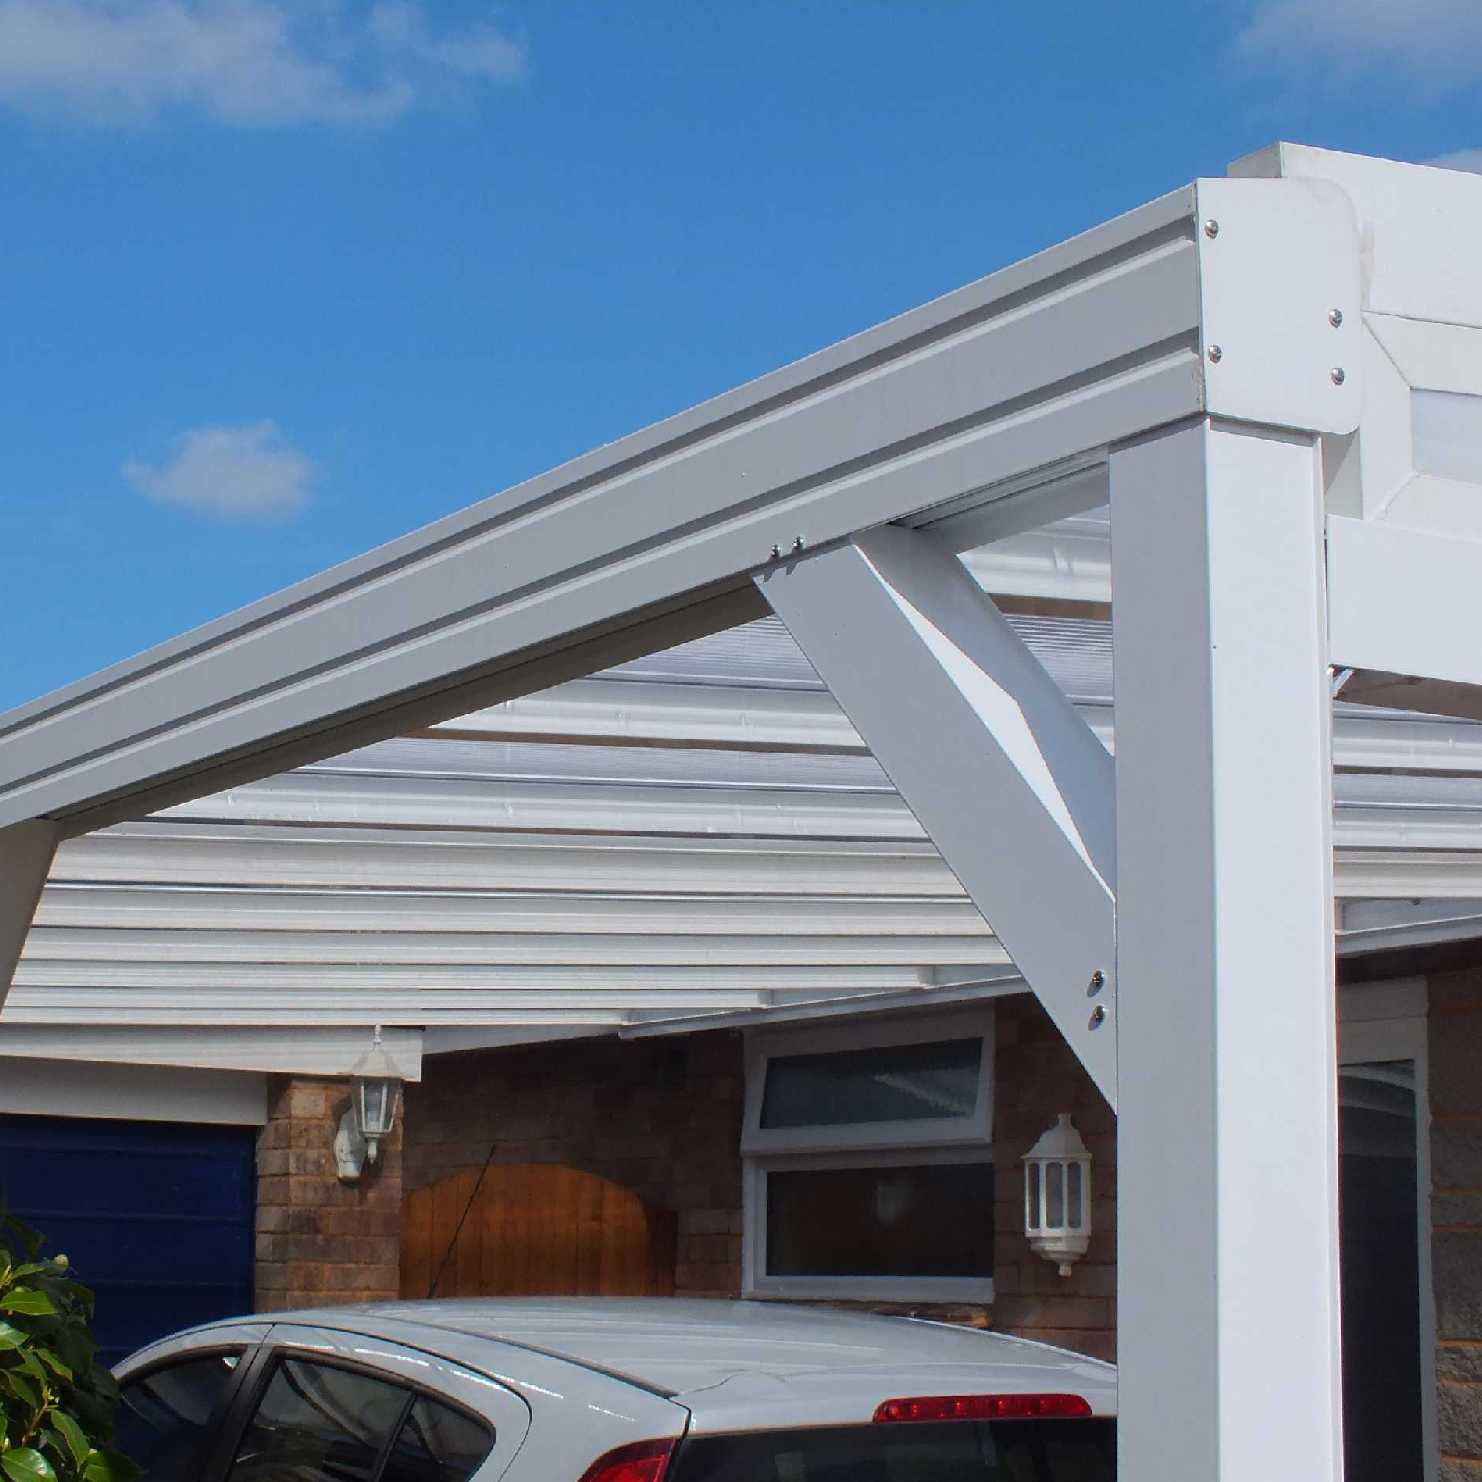 Great deals on Omega Smart Lean-To Canopy, White with 16mm Polycarbonate Glazing - 3.1m (W) x 3.0m (P), (2) Supporting Posts